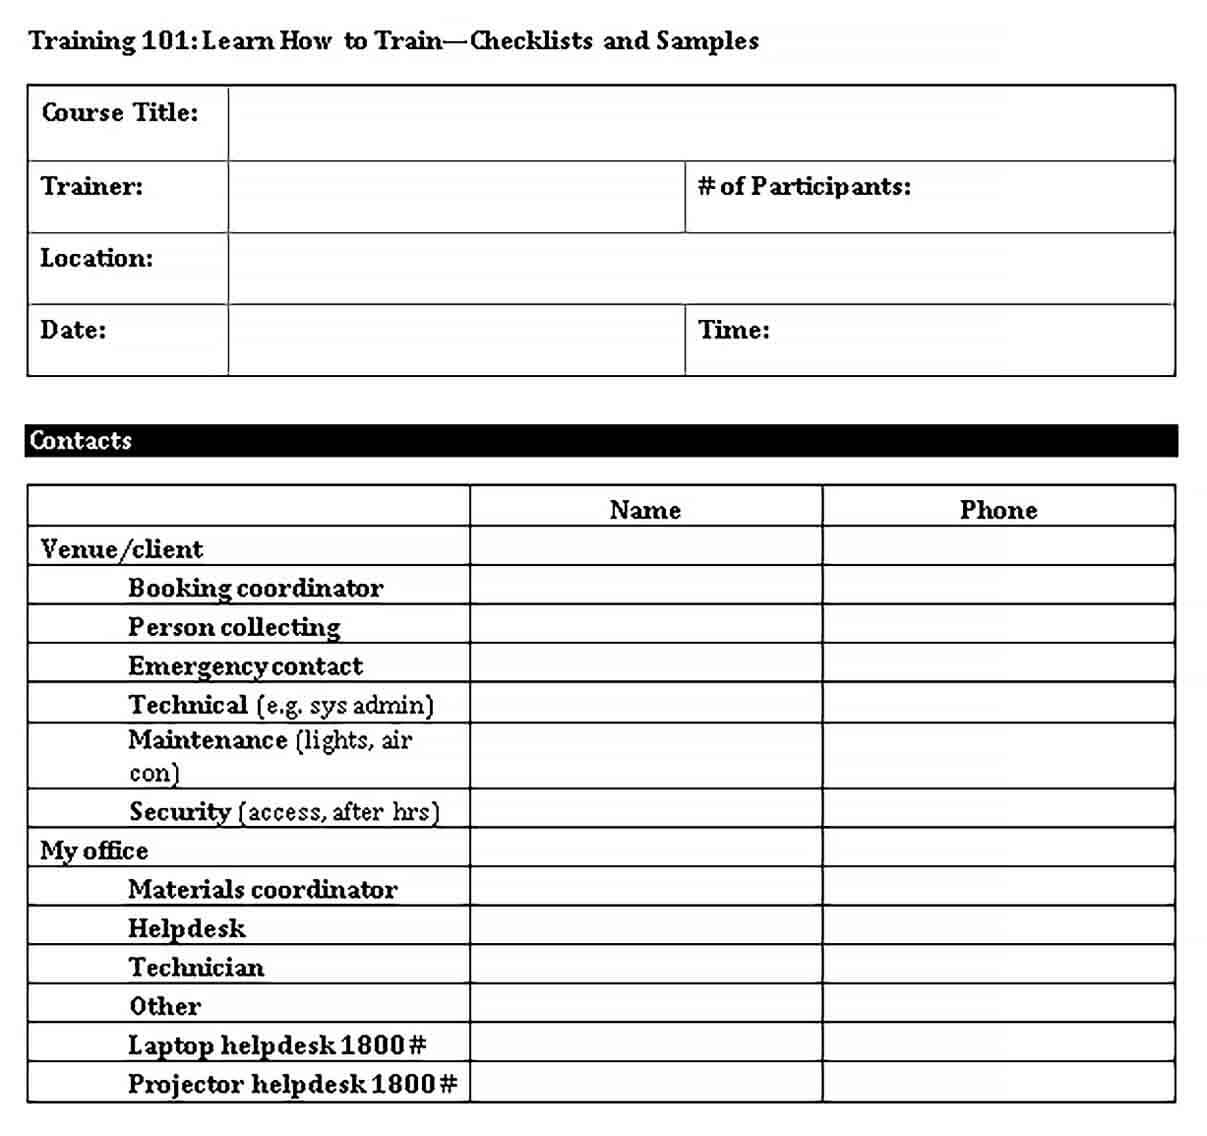 Sample PDF Format of Training Checklists Template 1